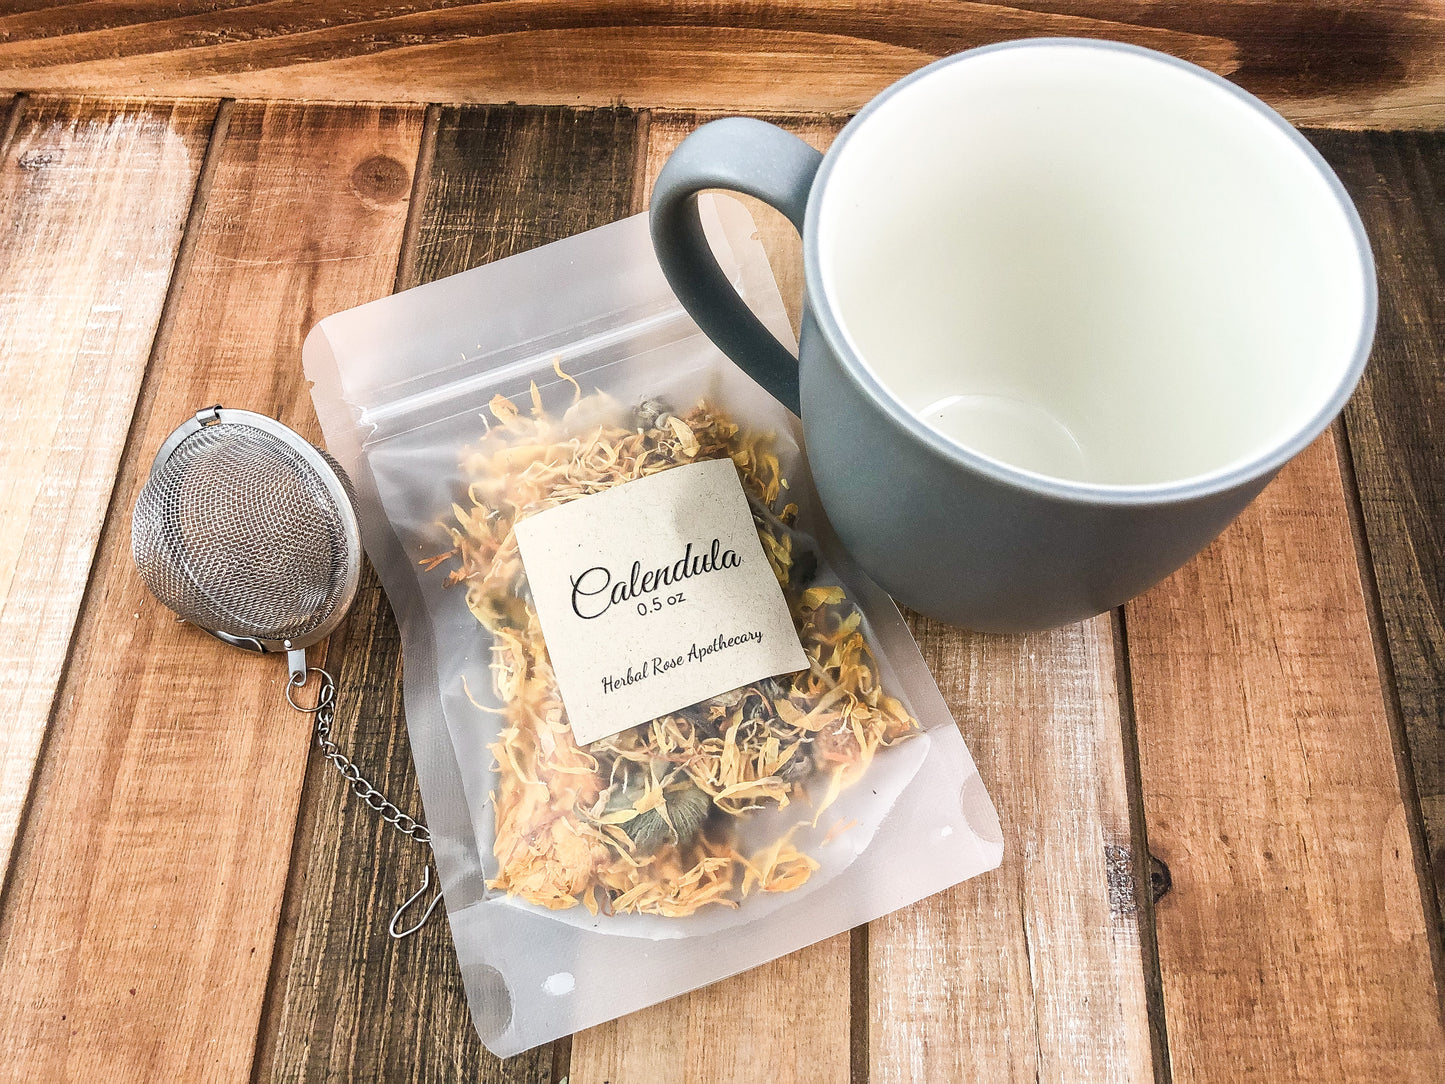 image is looking down into mug on a wooden background with a mug that is grey on outside and white inside, mesh tea strainer and a bag of dried calendula flowers in a 0.5oz size bag 